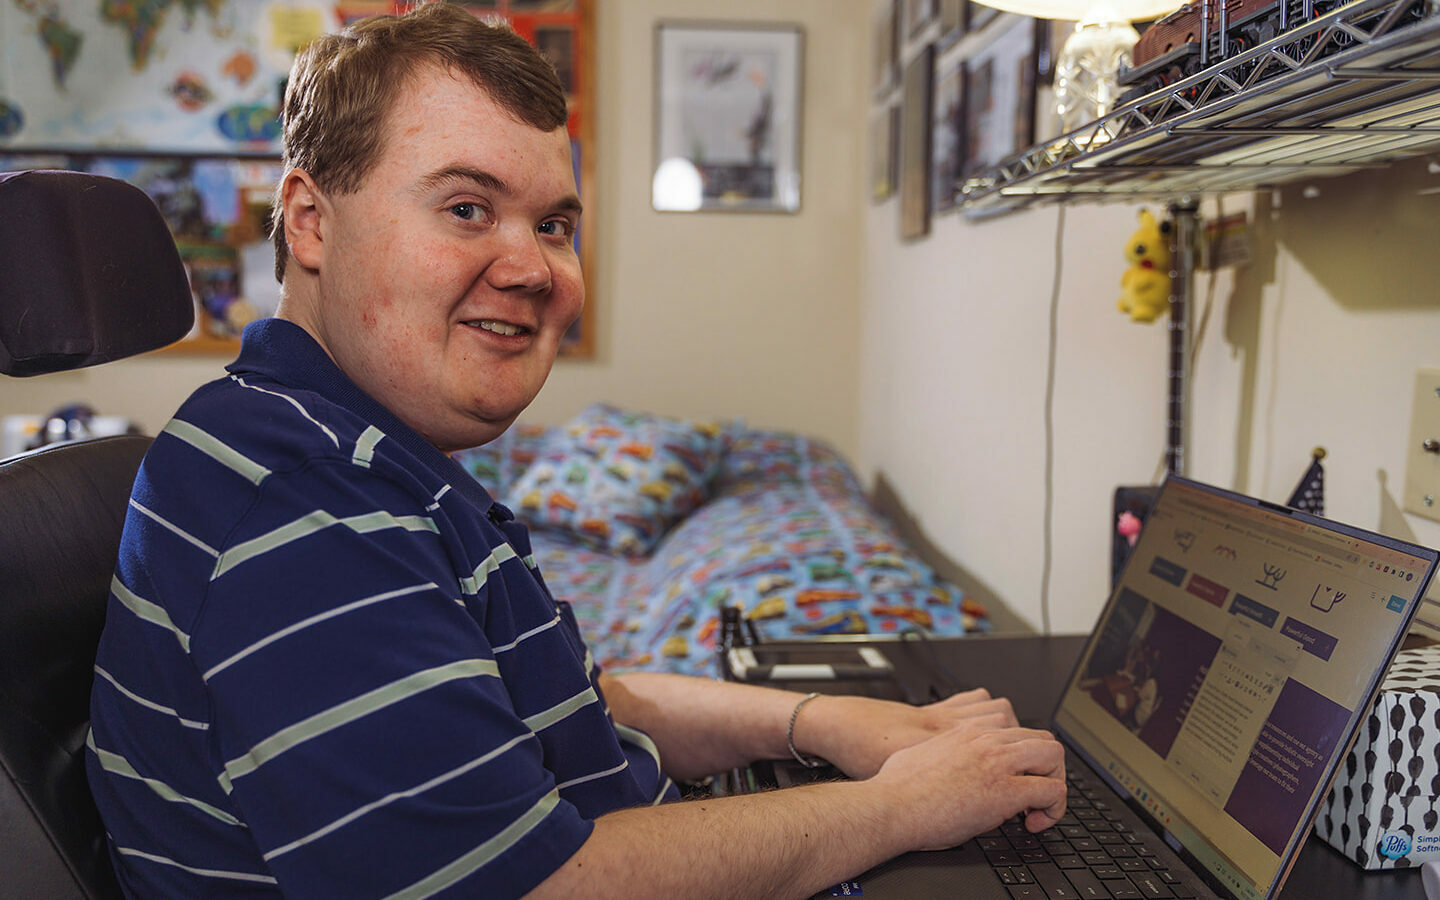 A man with Duchenne muscular dystrophy wearing a striped short-sleeved dress shirt types on a laptop computer.